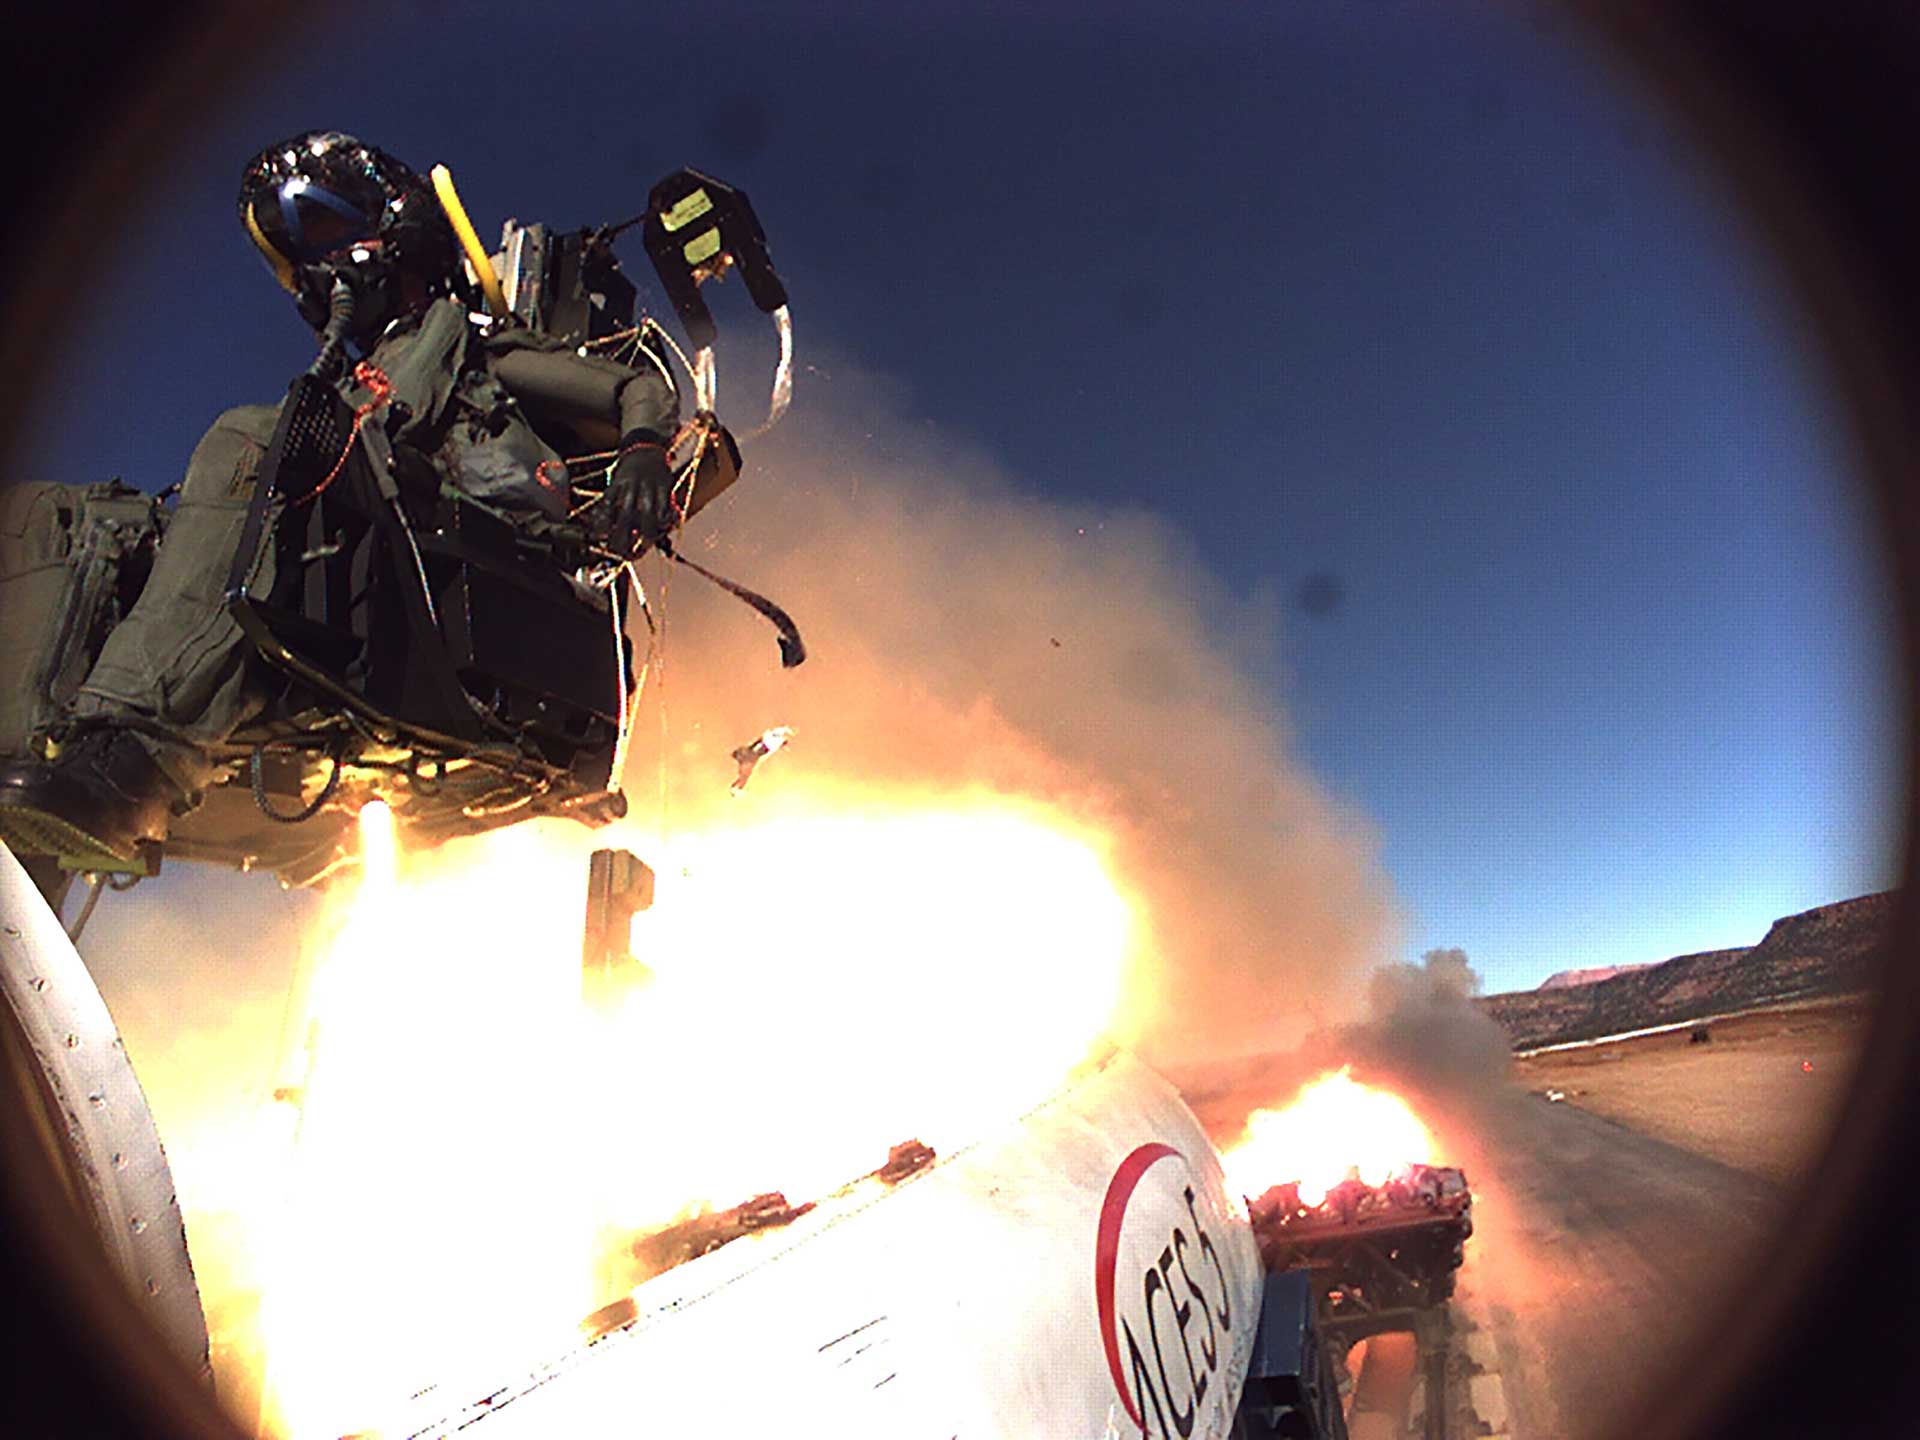 Pilot ejecting from an aircraft